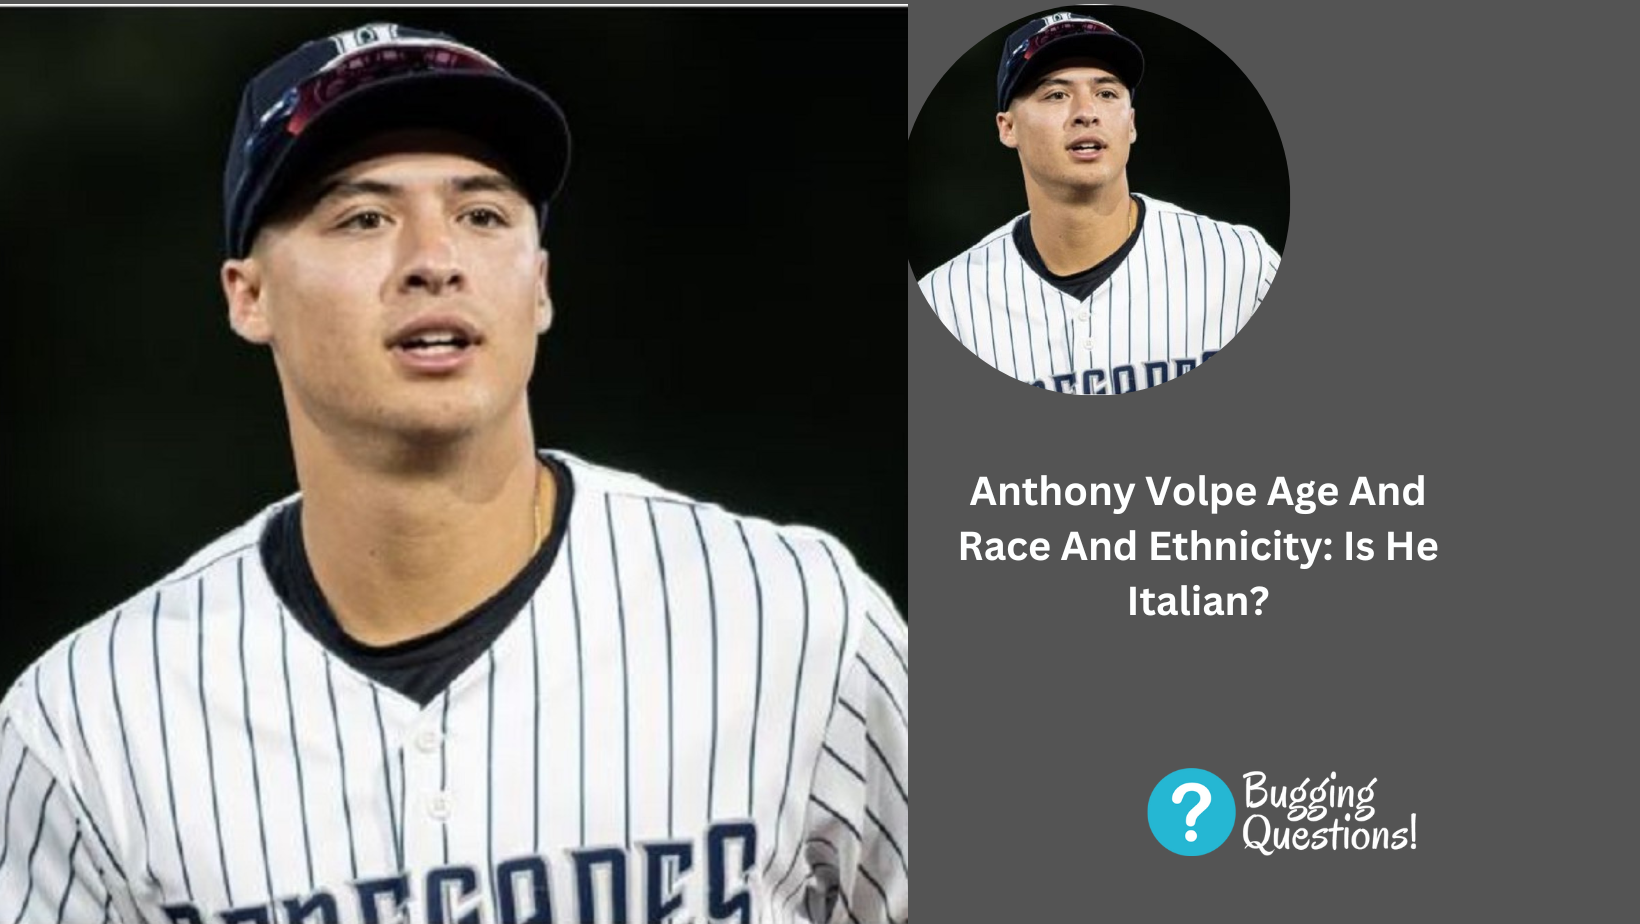 Anthony Volpe Age And Race And Ethnicity: Is He Italian?